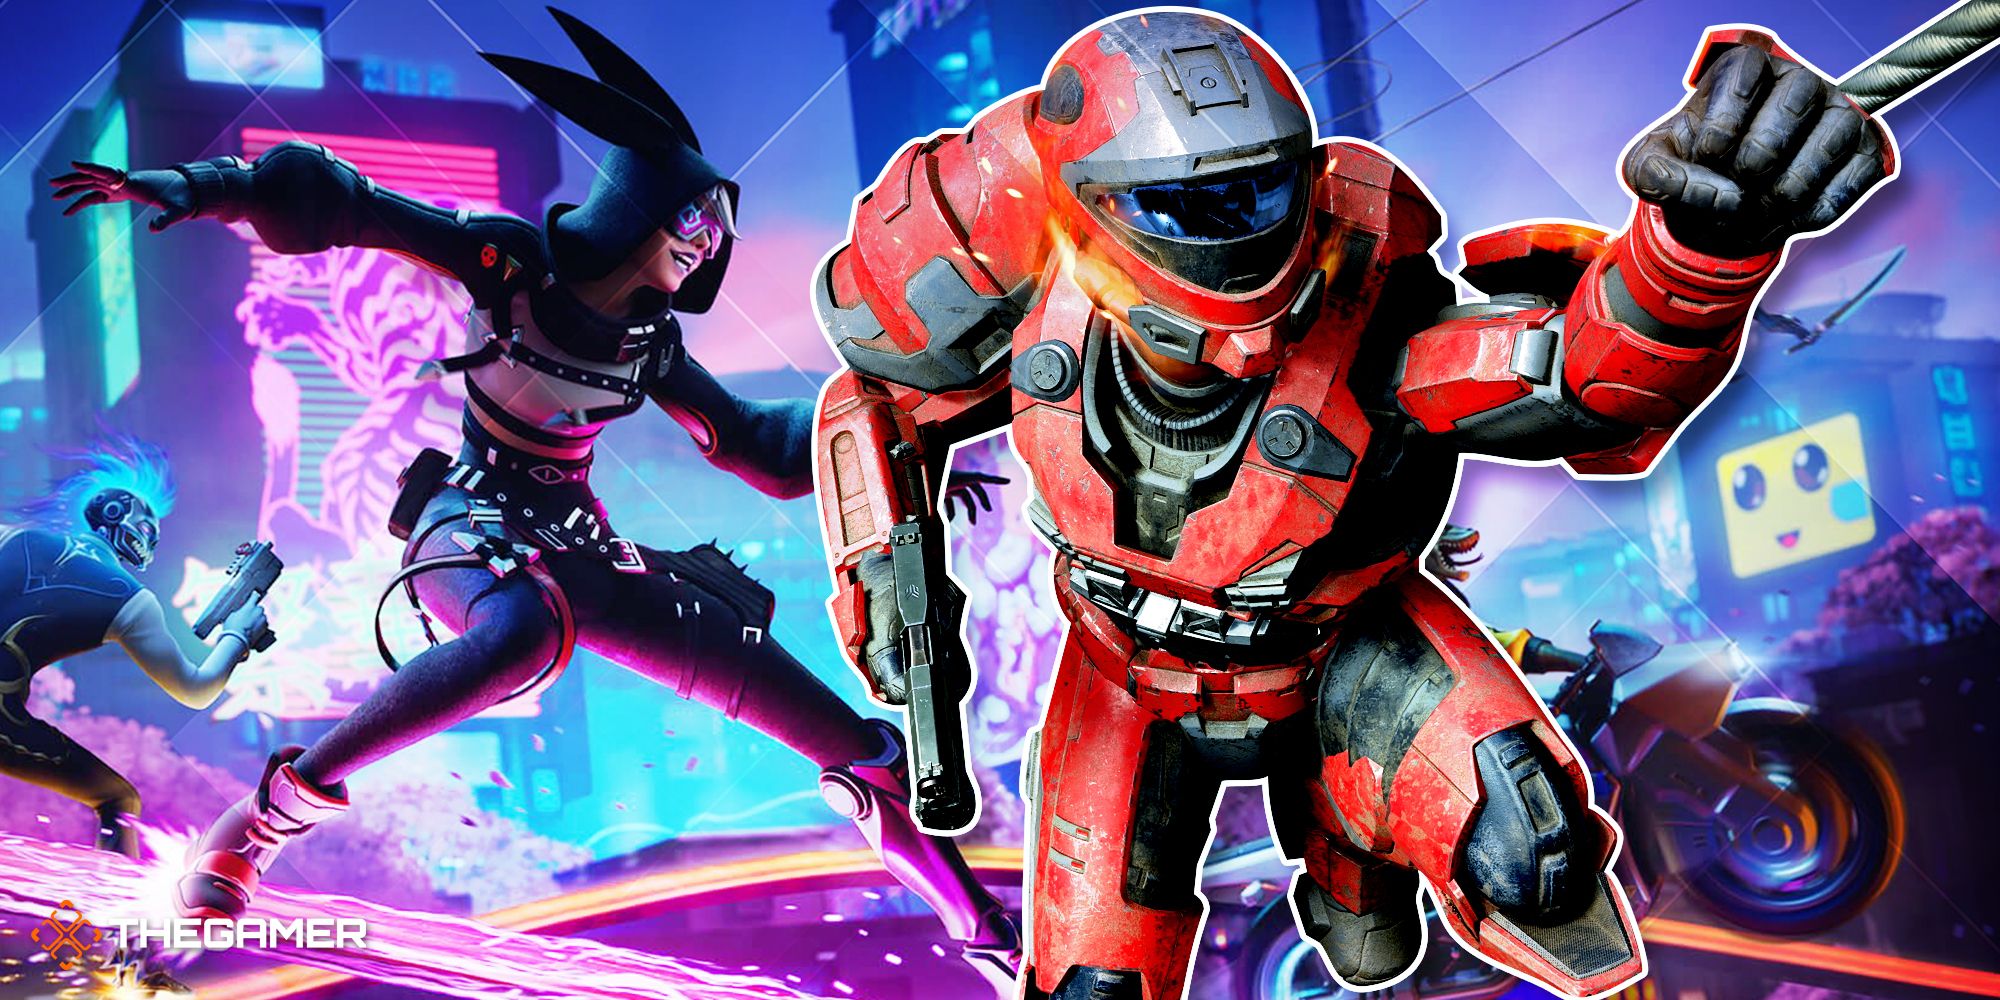 Fortnite Mega City banner art with Master Chief in red armor superimposed over it